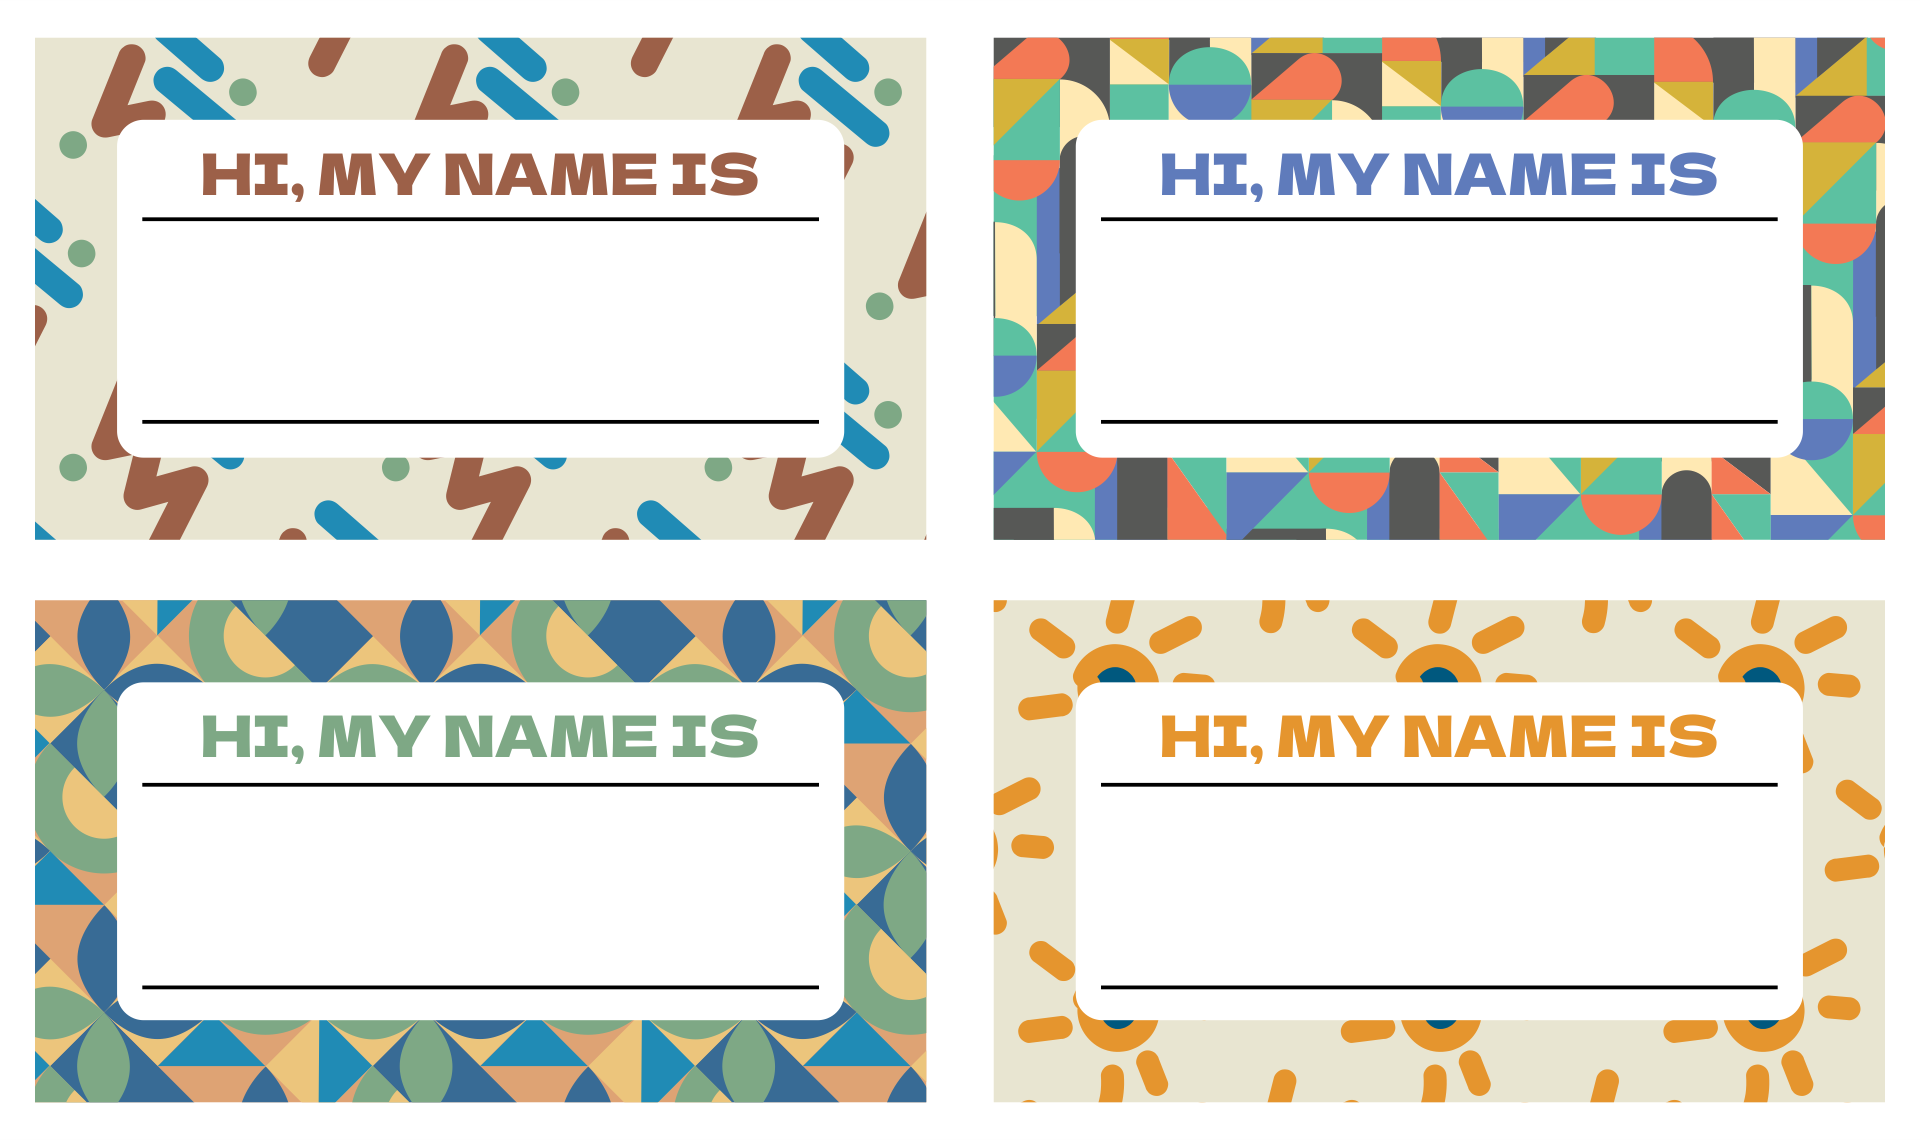 Employee Name Badge Template from www.printablee.com